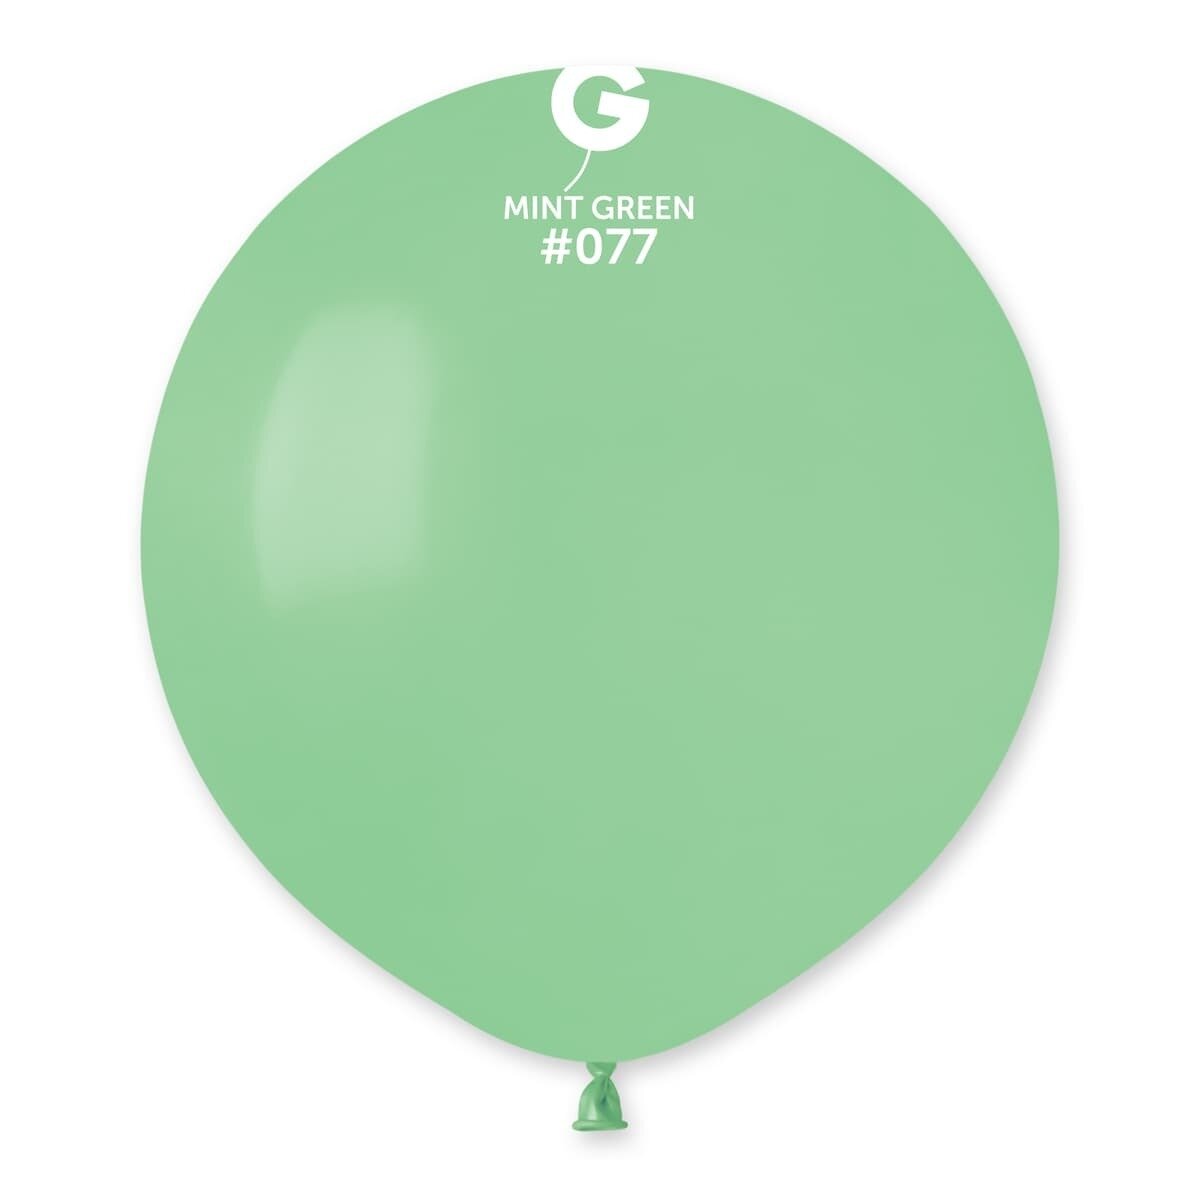 Standard Mint Green #077 19in - 25 pieces